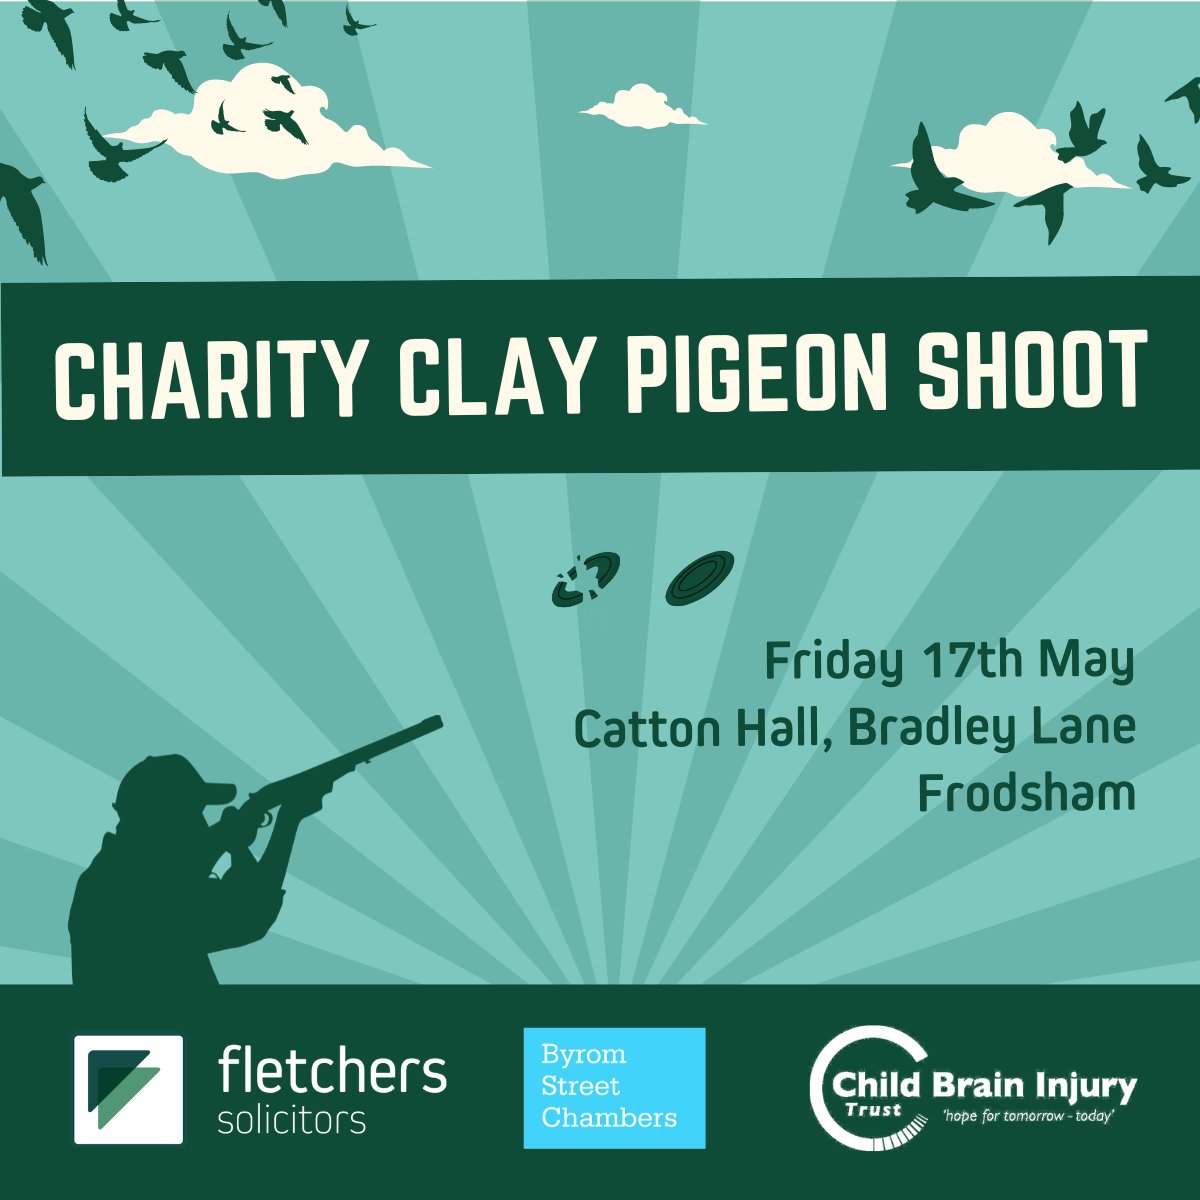 We're excited to welcome guests from @FrenkelTopping , @ByromStreet, @PremexGroup , William Martin and colleagues from @Seriouslaw and @BlumeUK  for a fun-filled day of clay pigeon shooting to raise funds for @cbituk 
#charitypartnership #charitysupport